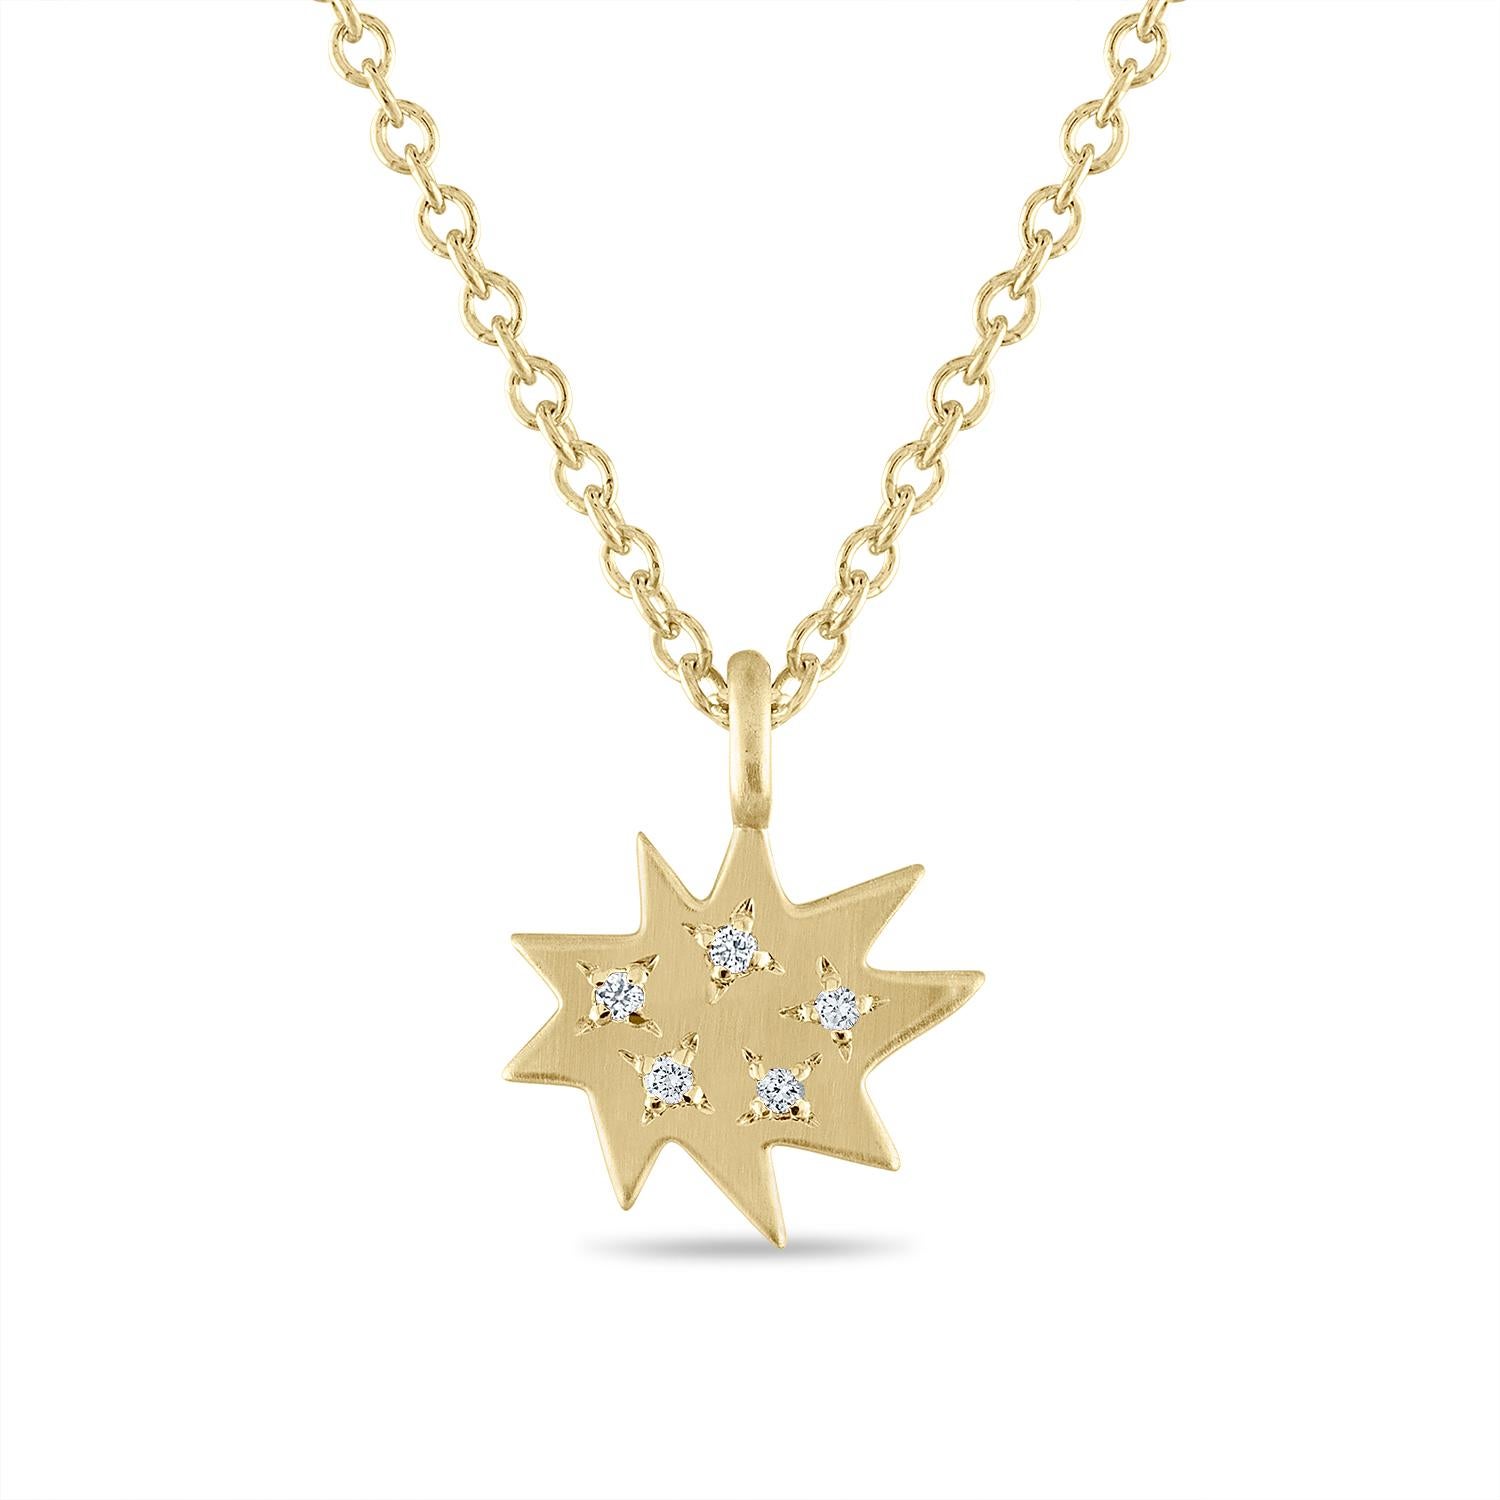 Elegant and adorable! Our Mini Stella Necklace is the perfect piece to layer or wear alone. Our iconic 14k gold organic star in a new delicate size hangs on a 14k gold chain and sparkles with just the right number of little diamonds. 

KAPOW! The